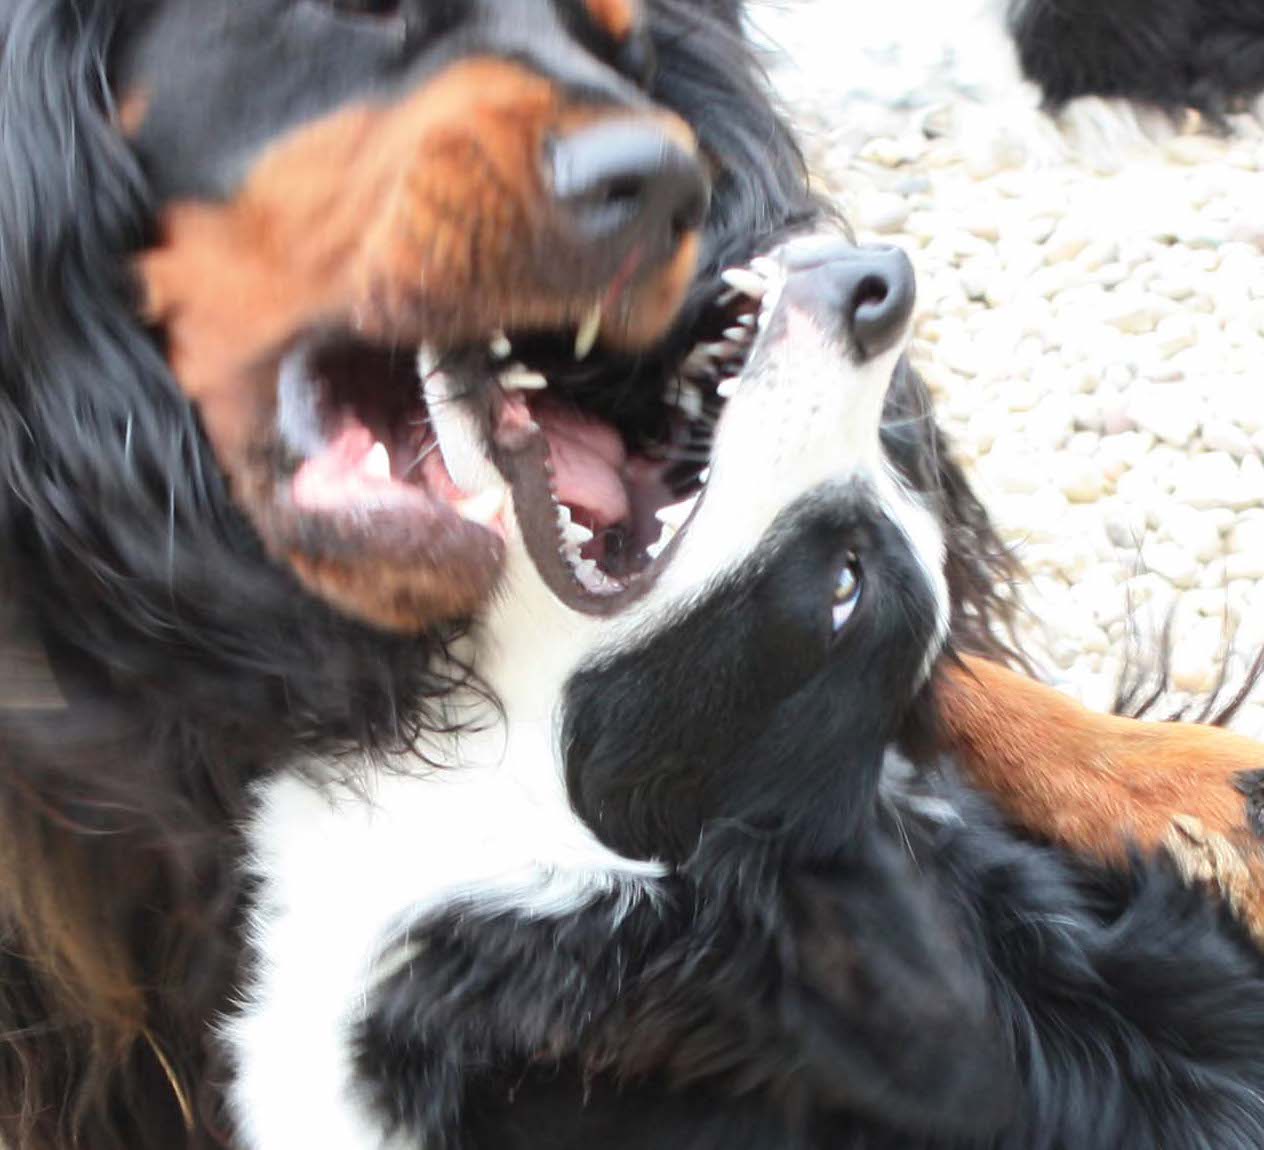 pup open mouth greeting other dog